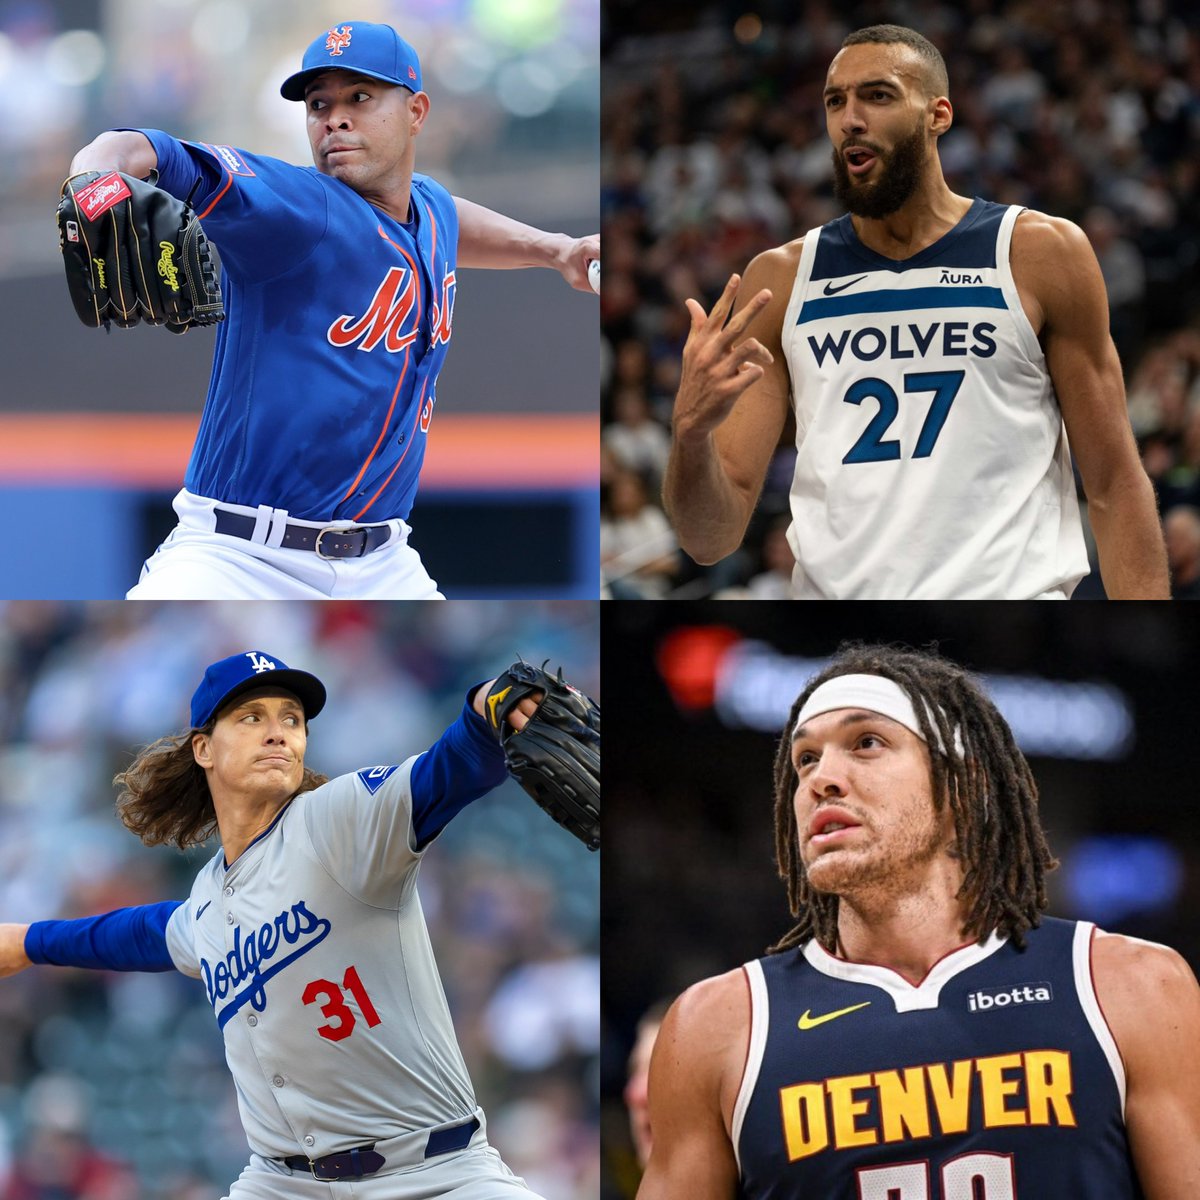 May 16th NBA & MLB Full List! ❤️if you appreciate my constant work daily. Aaron Gordon 3.5 Asts “O” (-130)Bet365 Rudy Gobert Double Double “Yes” (-115)FD Tyler Glasnow to Record a Win (-111)DK Jose Quintana 16.5 POs “U” (-120)DK I can feel 4-0 in my bones. Thank you for